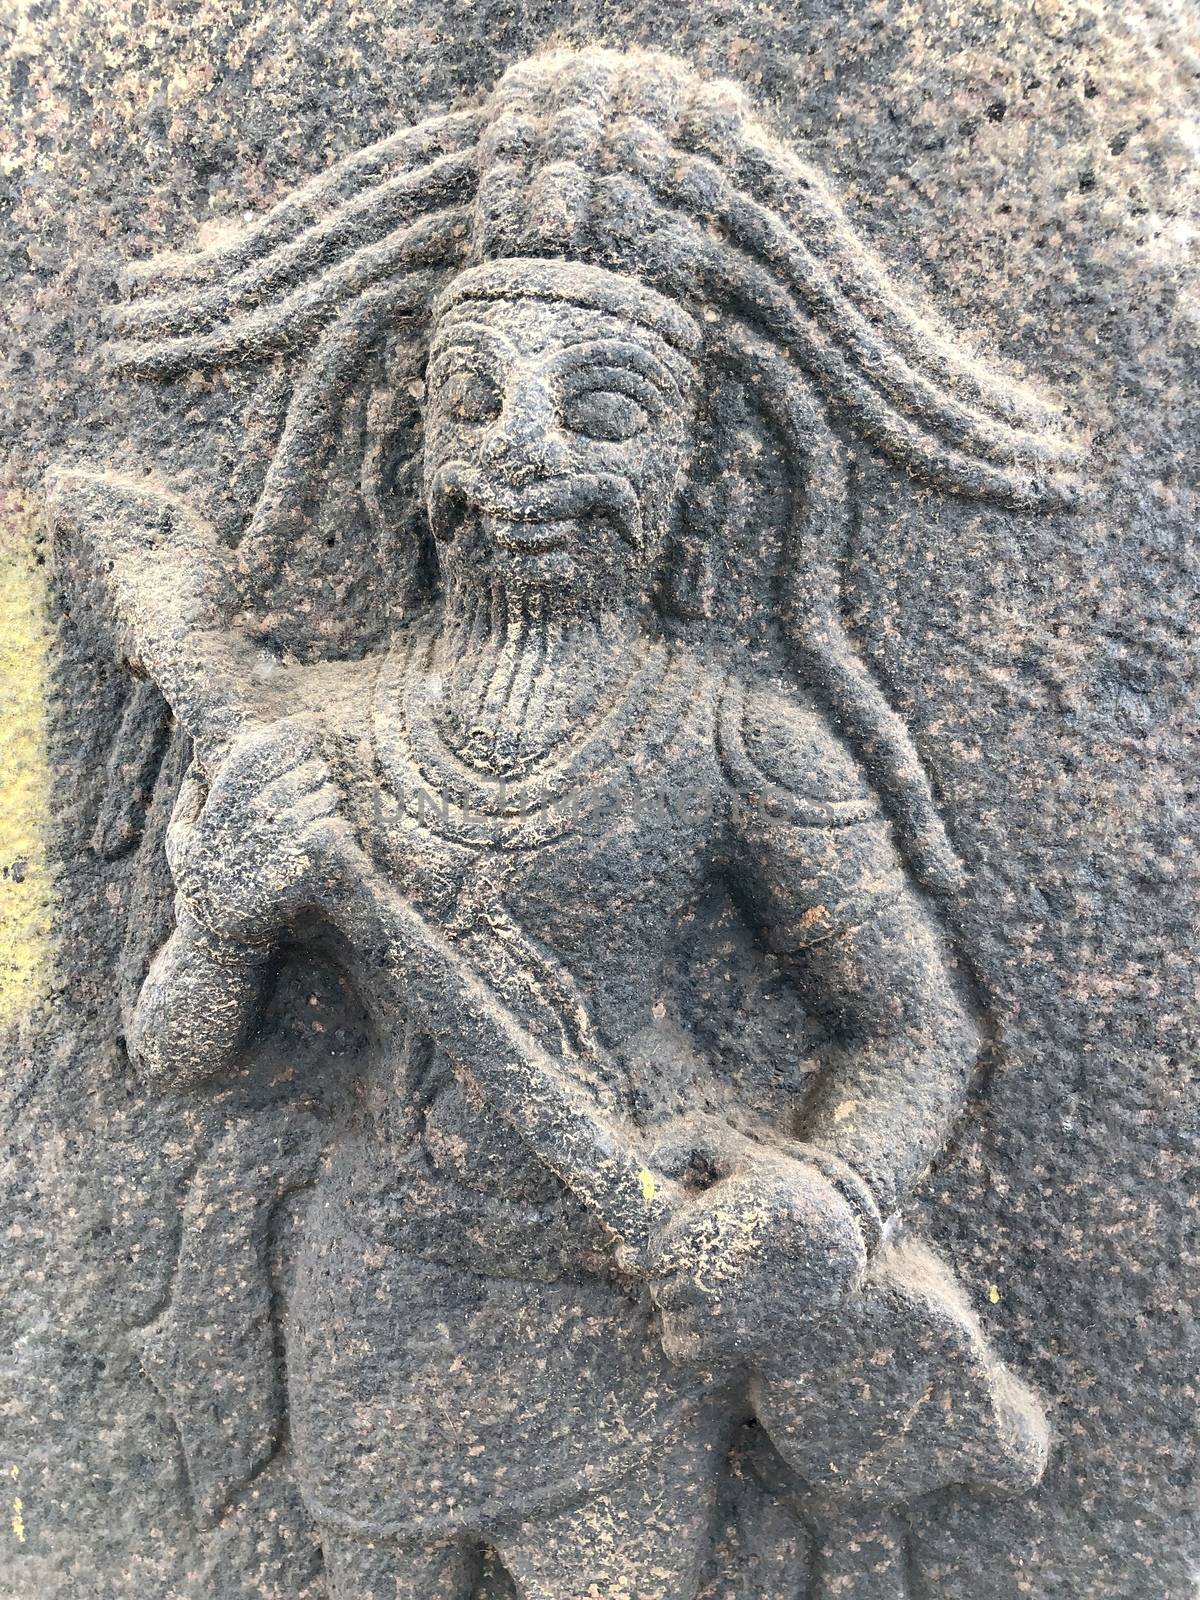 Man with a weapon in hand sculpture. Bas relief sculpture carved in the walls of Shiva temple, Tamil nadu by prabhakaran851